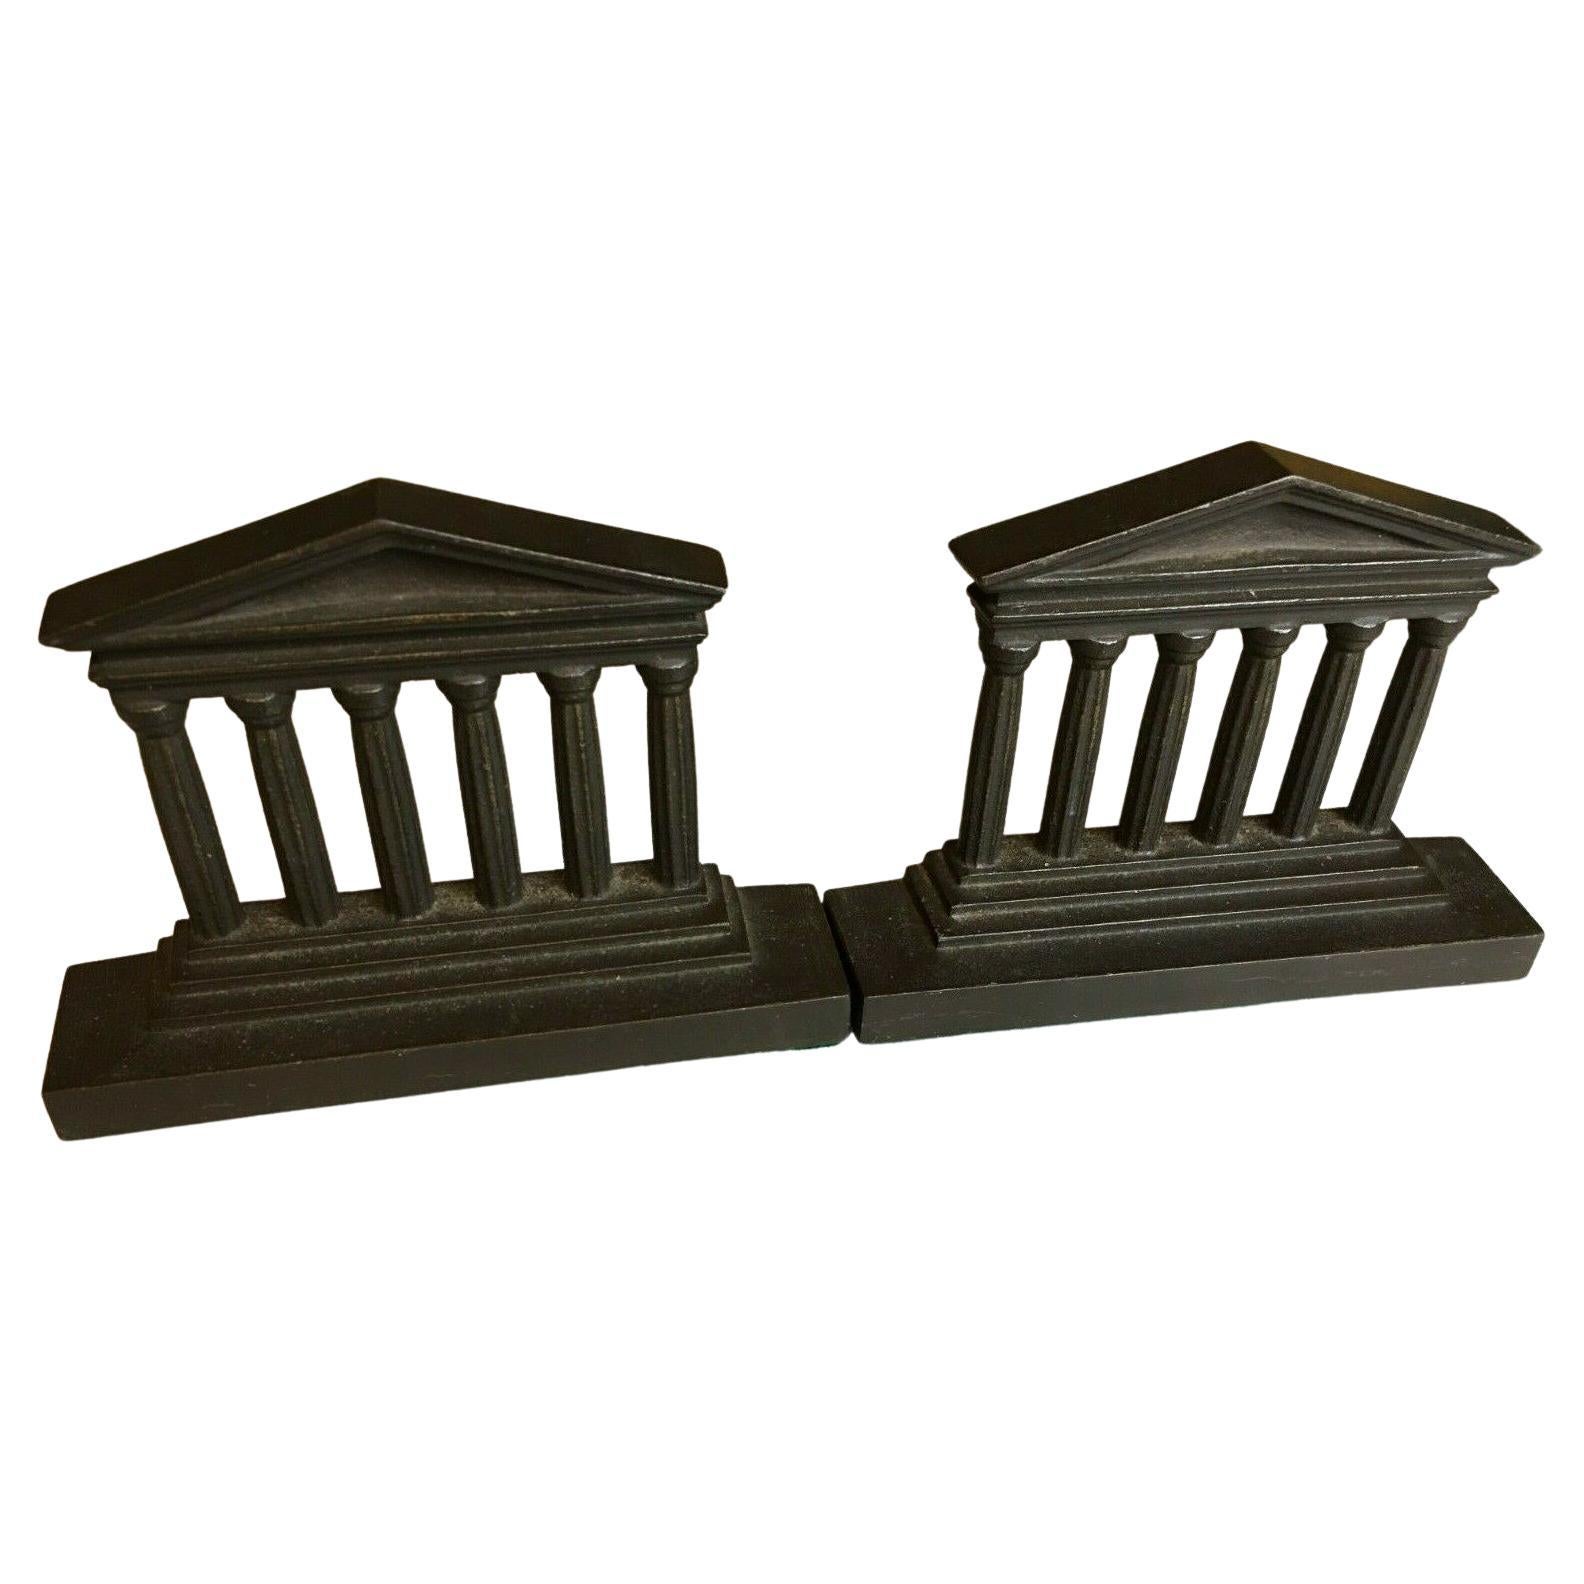 Iron Bradley Hubbard B&H Gold/Gilded Bookends Federal Neoclassical Building w/Columns For Sale